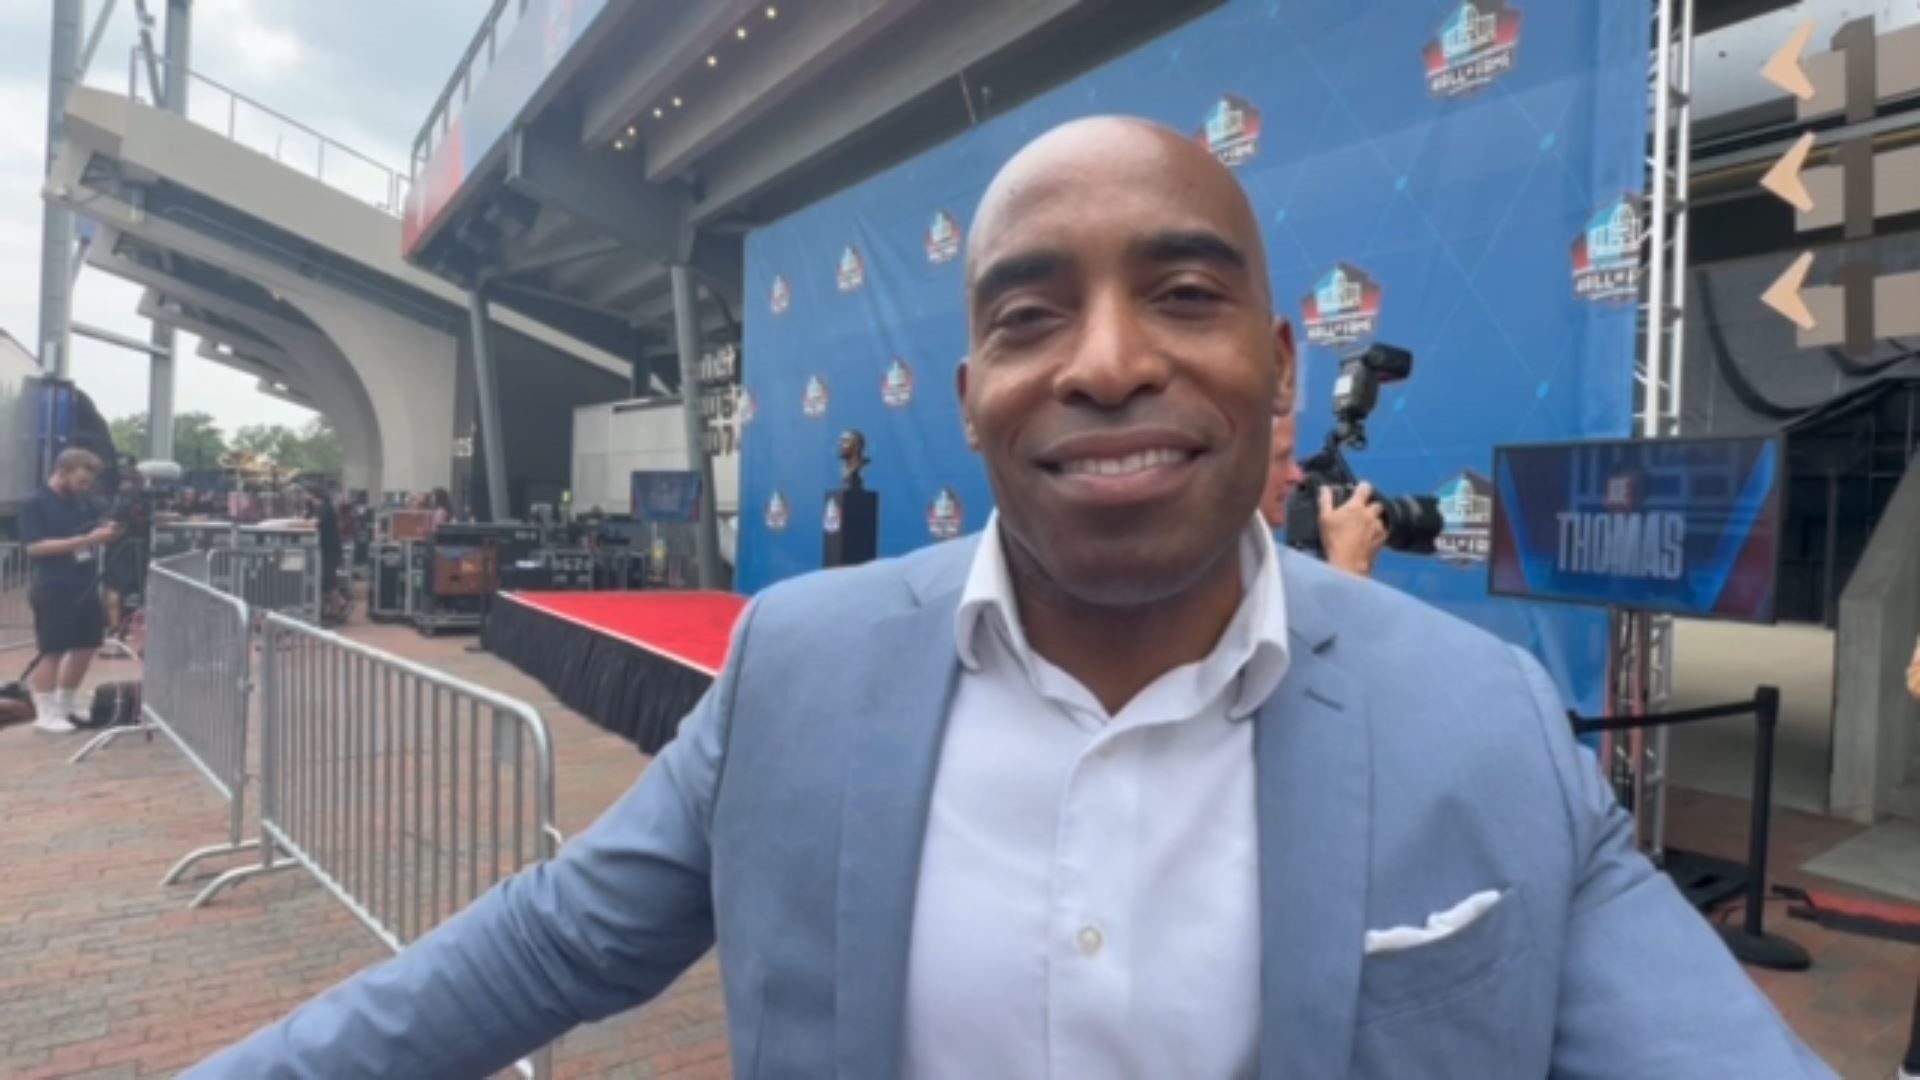 Ronde Barber never doubted he’d wind up in the Pro Football Hall of Fame.